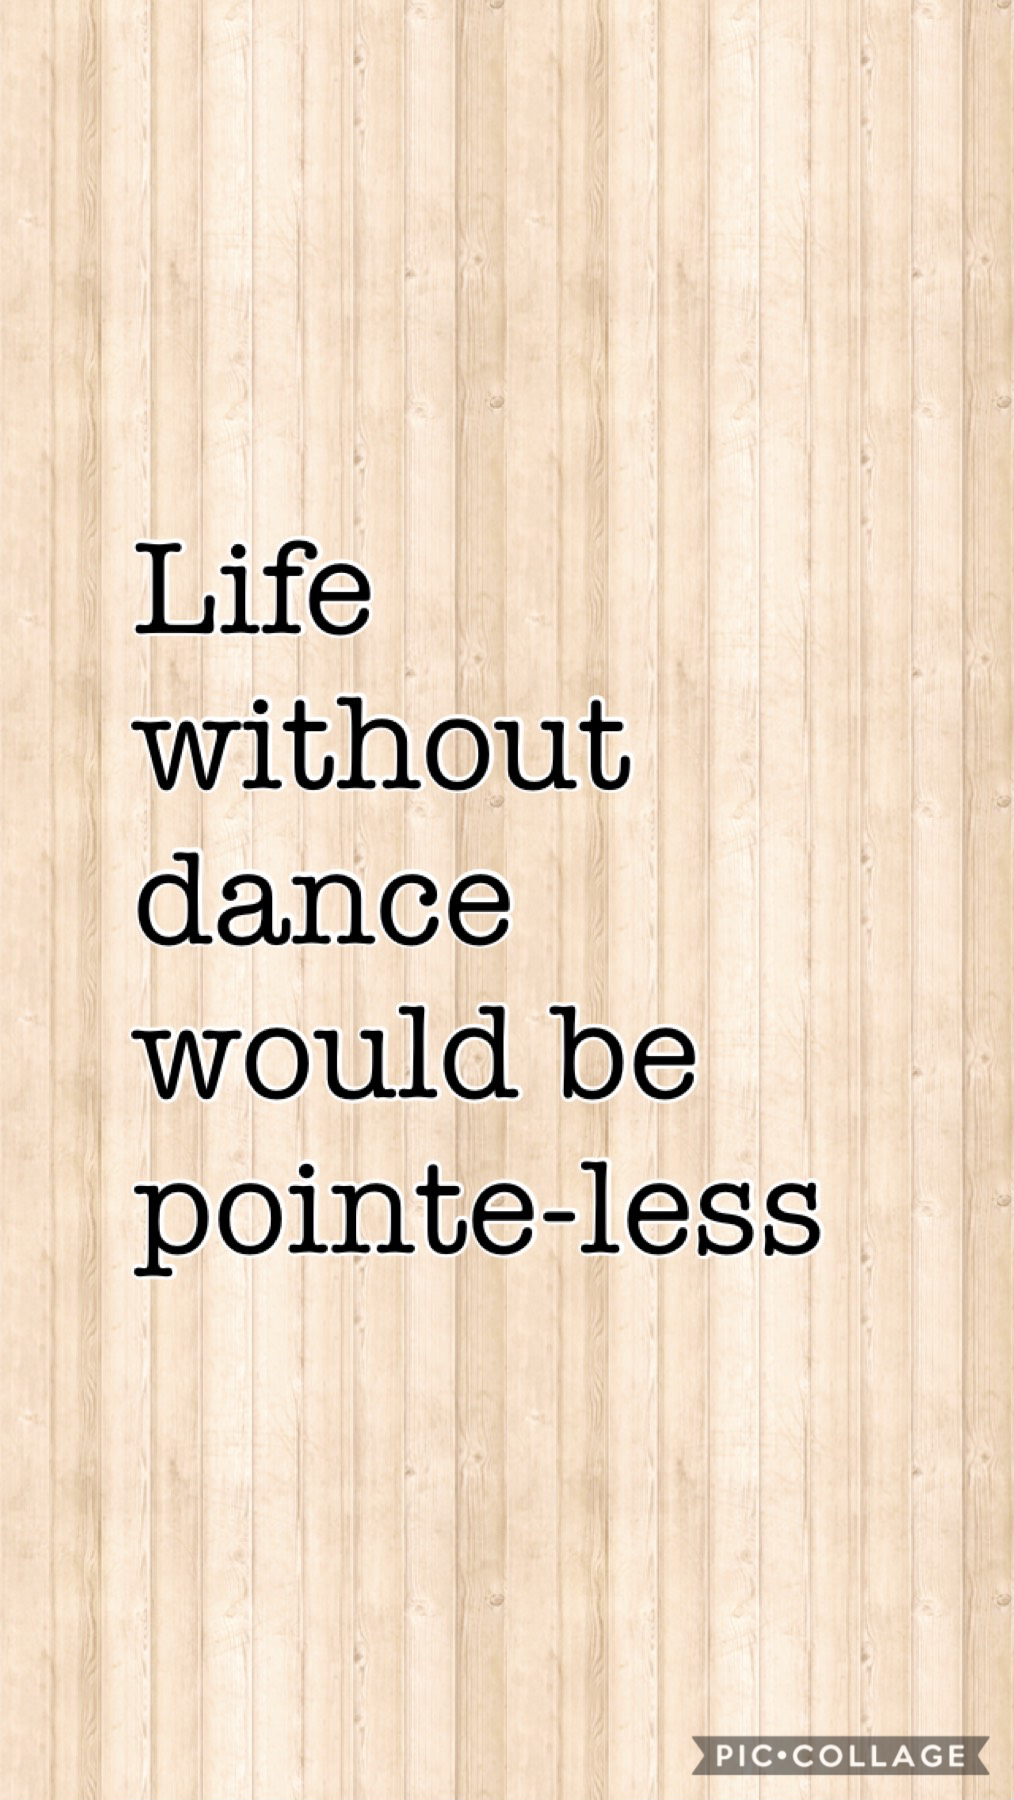 Quote of the week! Only dancers will understand the joke 